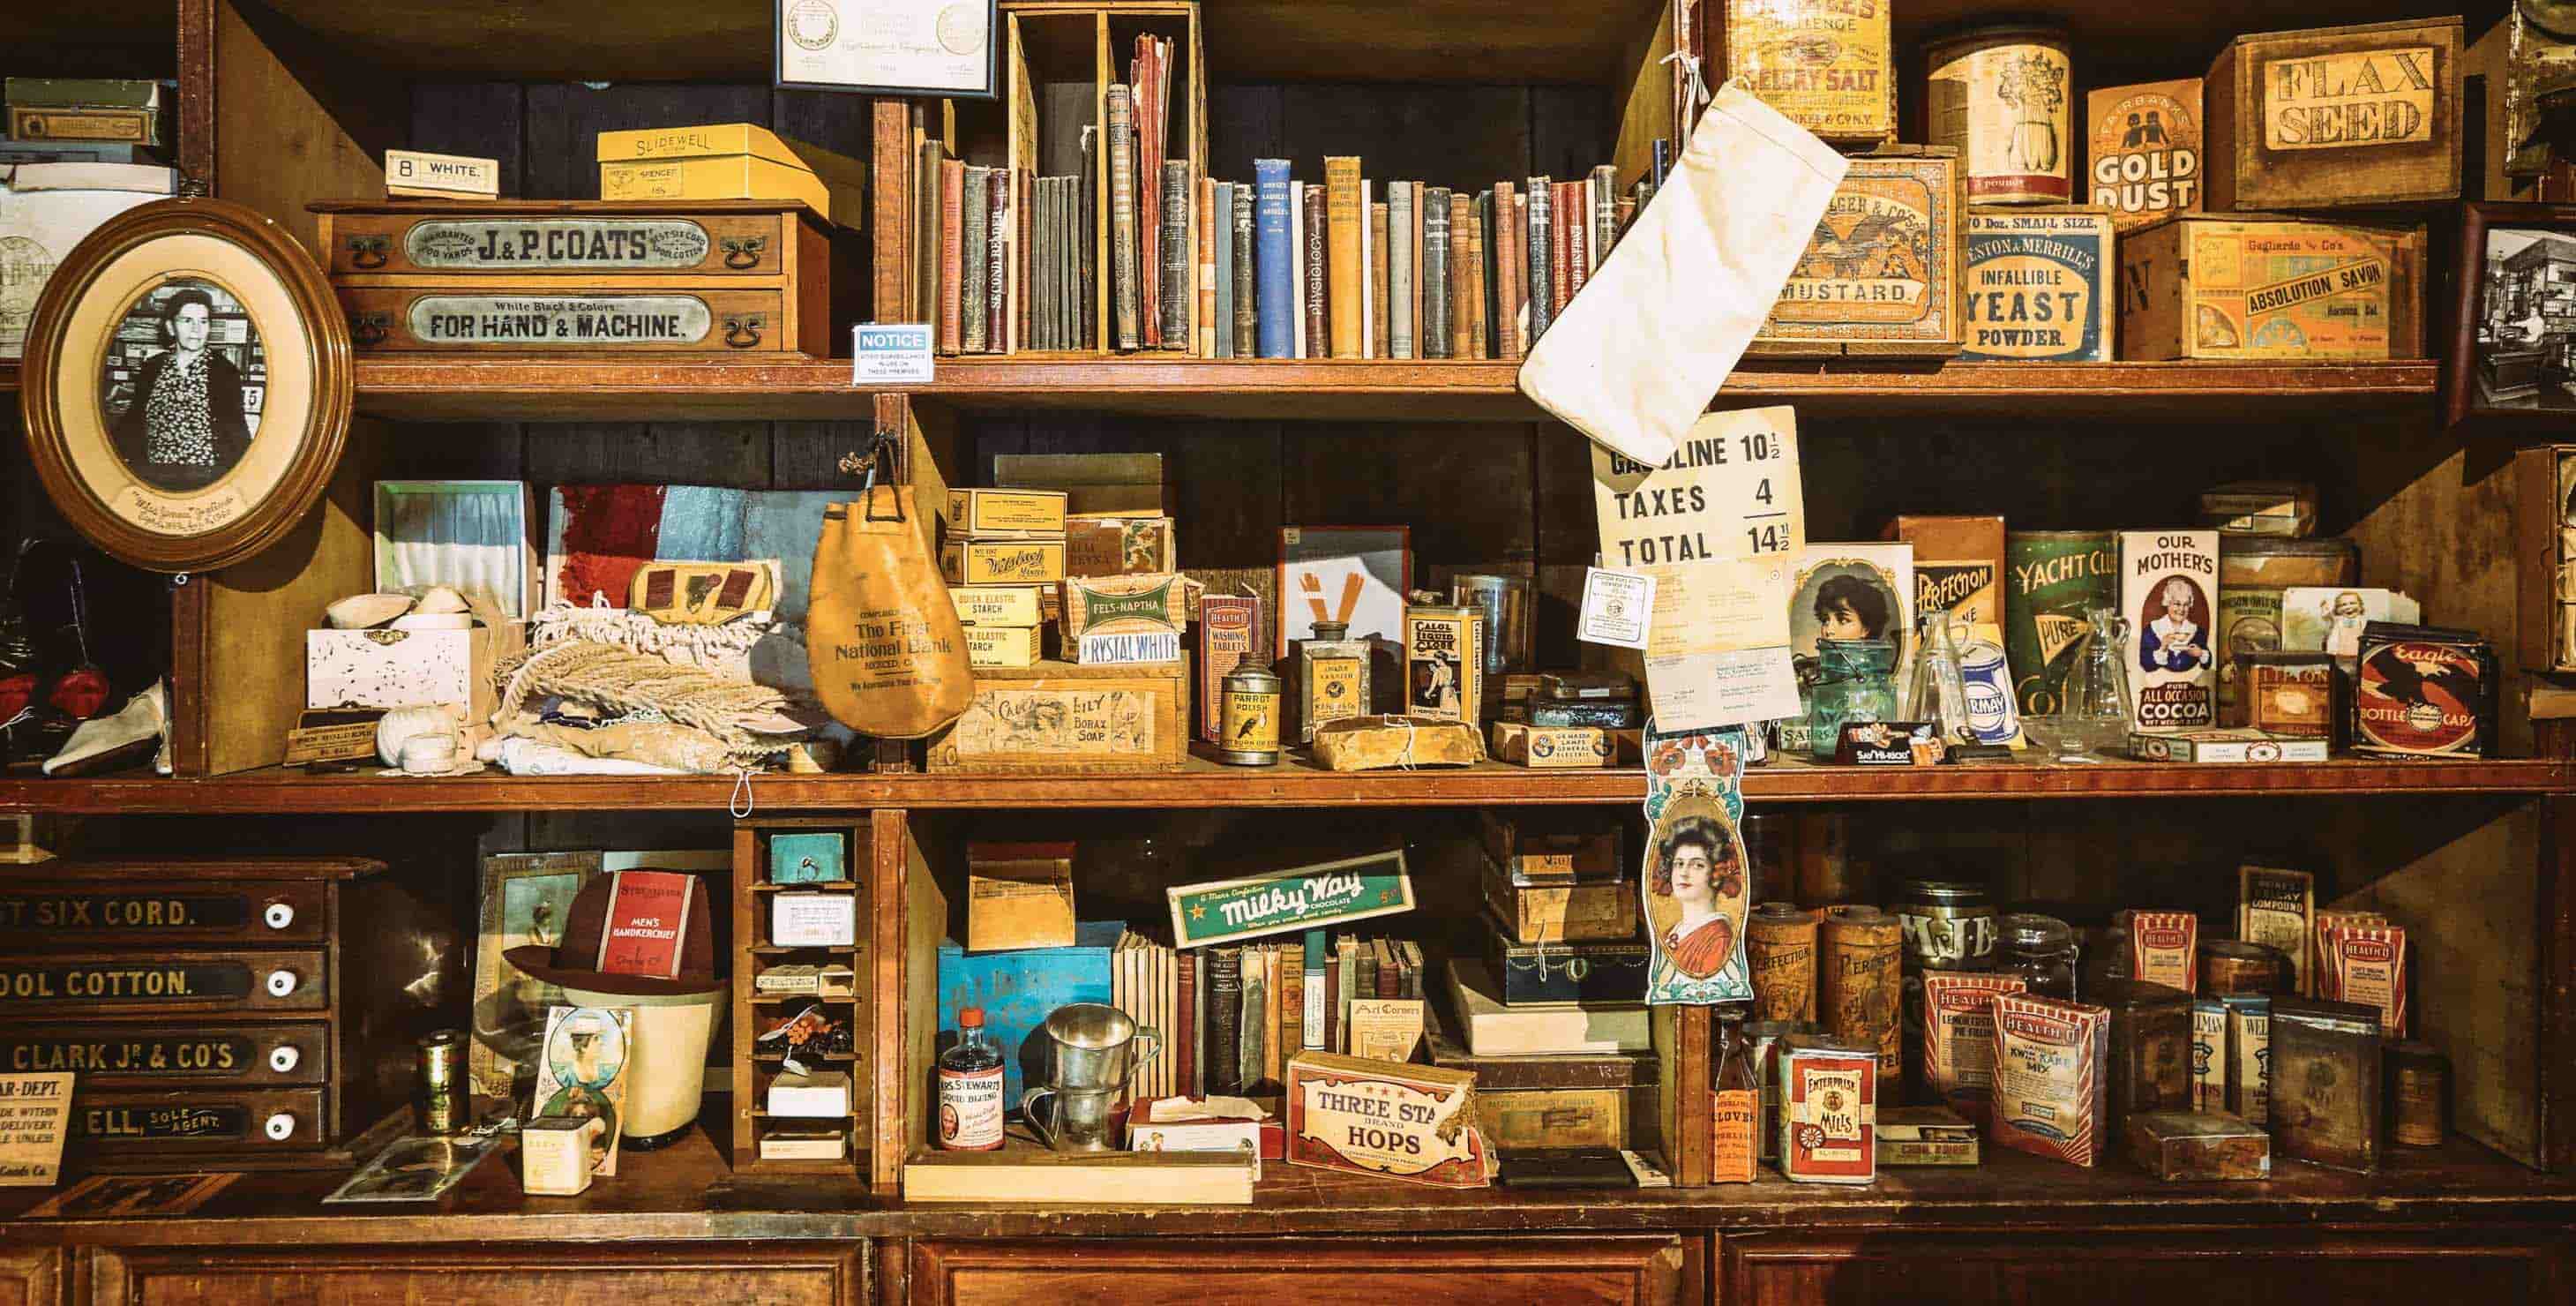 A wall of products in an antique store